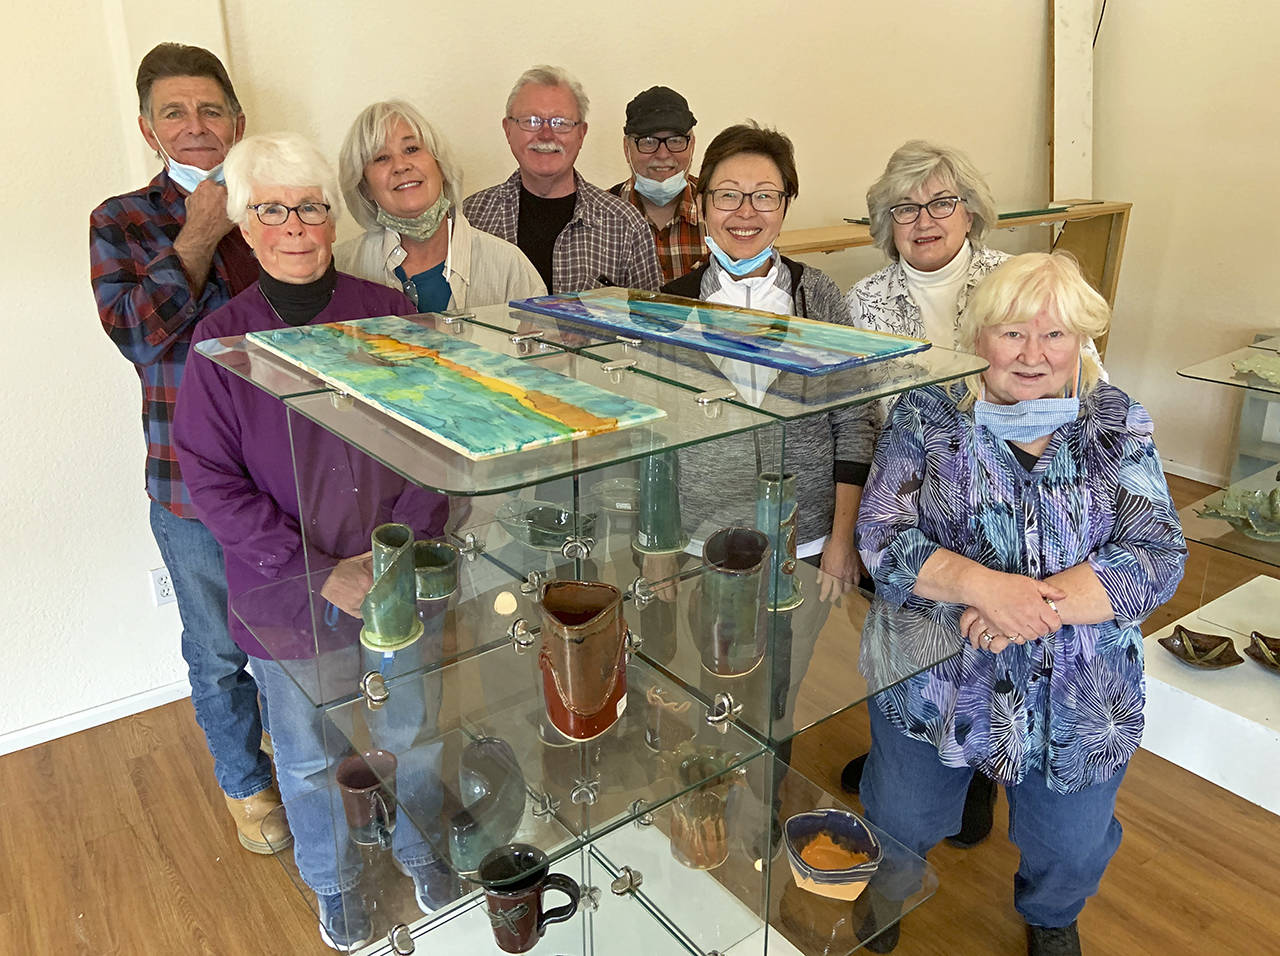 Ten local artisans have established the Grays Harbor Potters Guild at 2244 Simpson Ave. in Hoquiam. They plan to open their space next weekend for demonstrations and retail sales. Initial hours will be 10 a.m. to 3 p.m. every Friday through Sunday. Pictured, from left, are Gary Ganz, Lyn Nelson, Cindy Dana, Ken Slaughter, Richard Young, Evie Cheung, Melanie Knight and Pam Otteson. The two members not pictured are Sandy Early and Nancy Williams. Watch The Daily World next week for the full story.
Photo by Kat Bryant | The Daily World